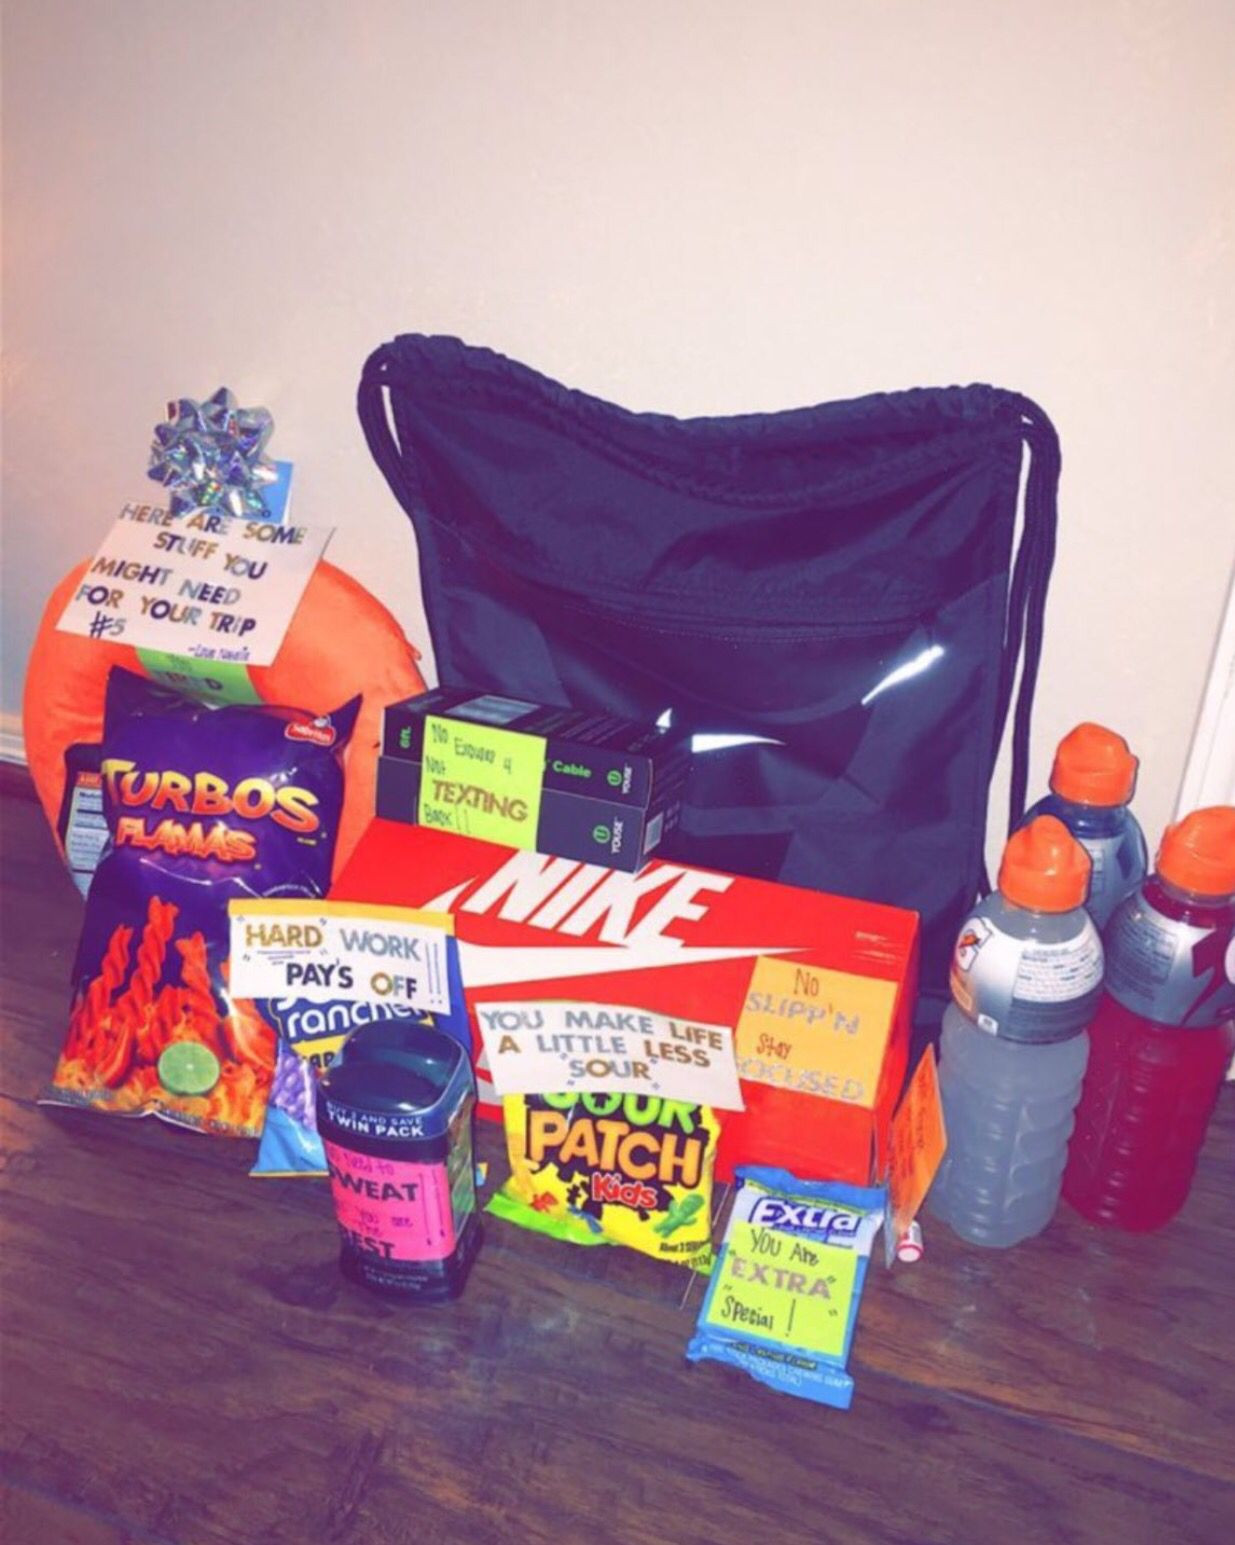 College Boyfriend Gift Ideas
 When he goes off to college Gifts